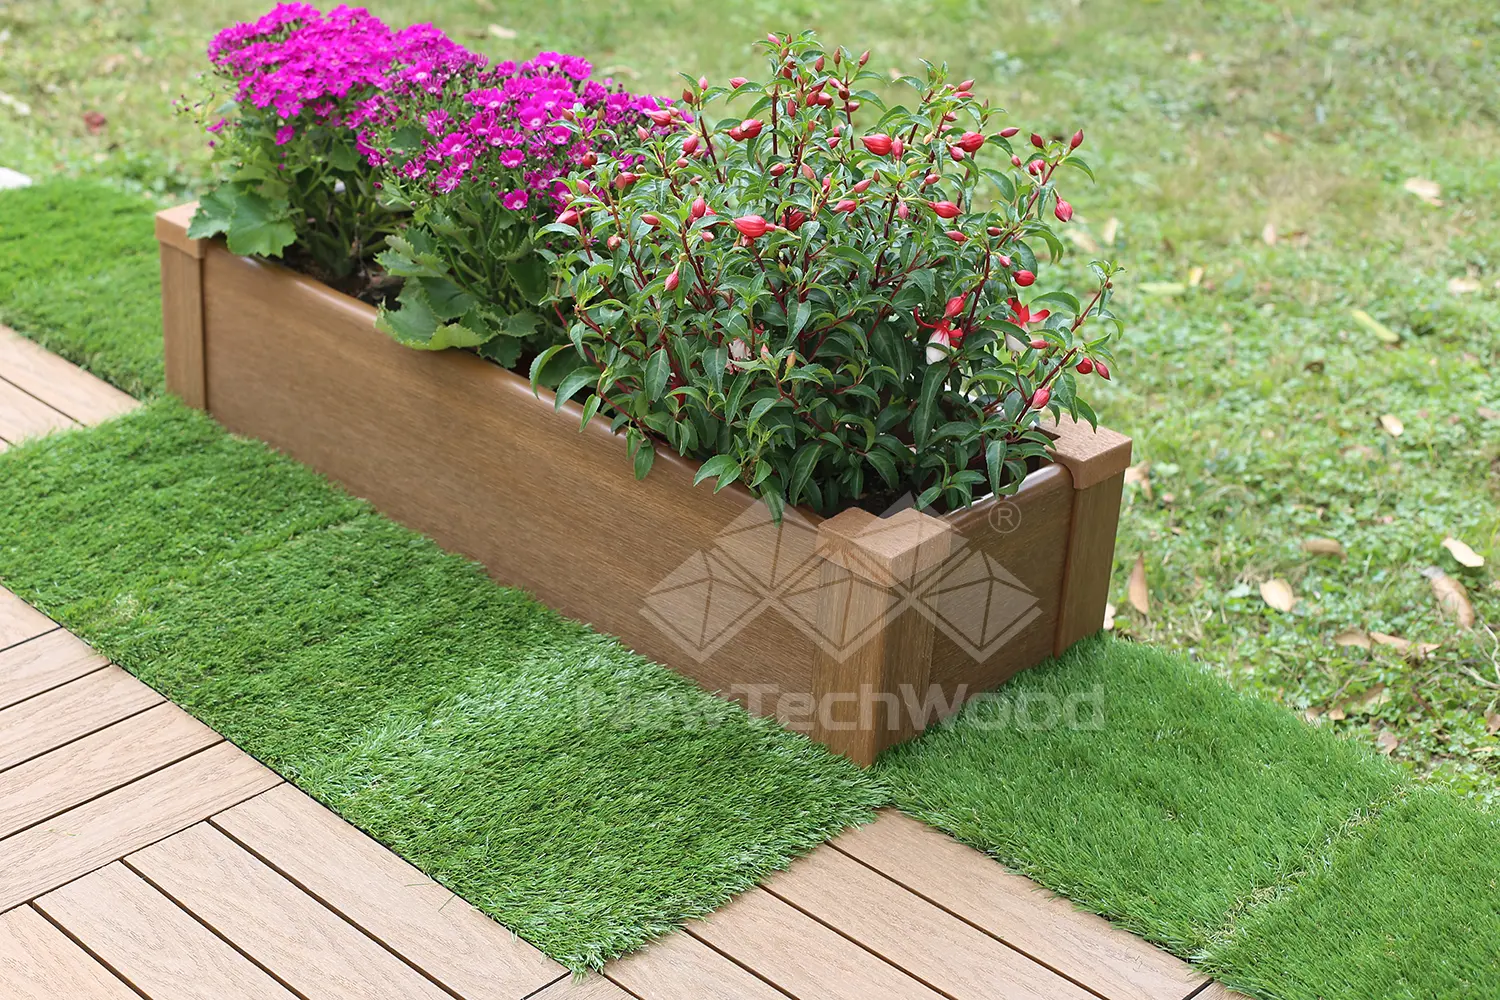 Installing Deck Tiles On Grass, How To Install Outdoor Tile On Grass